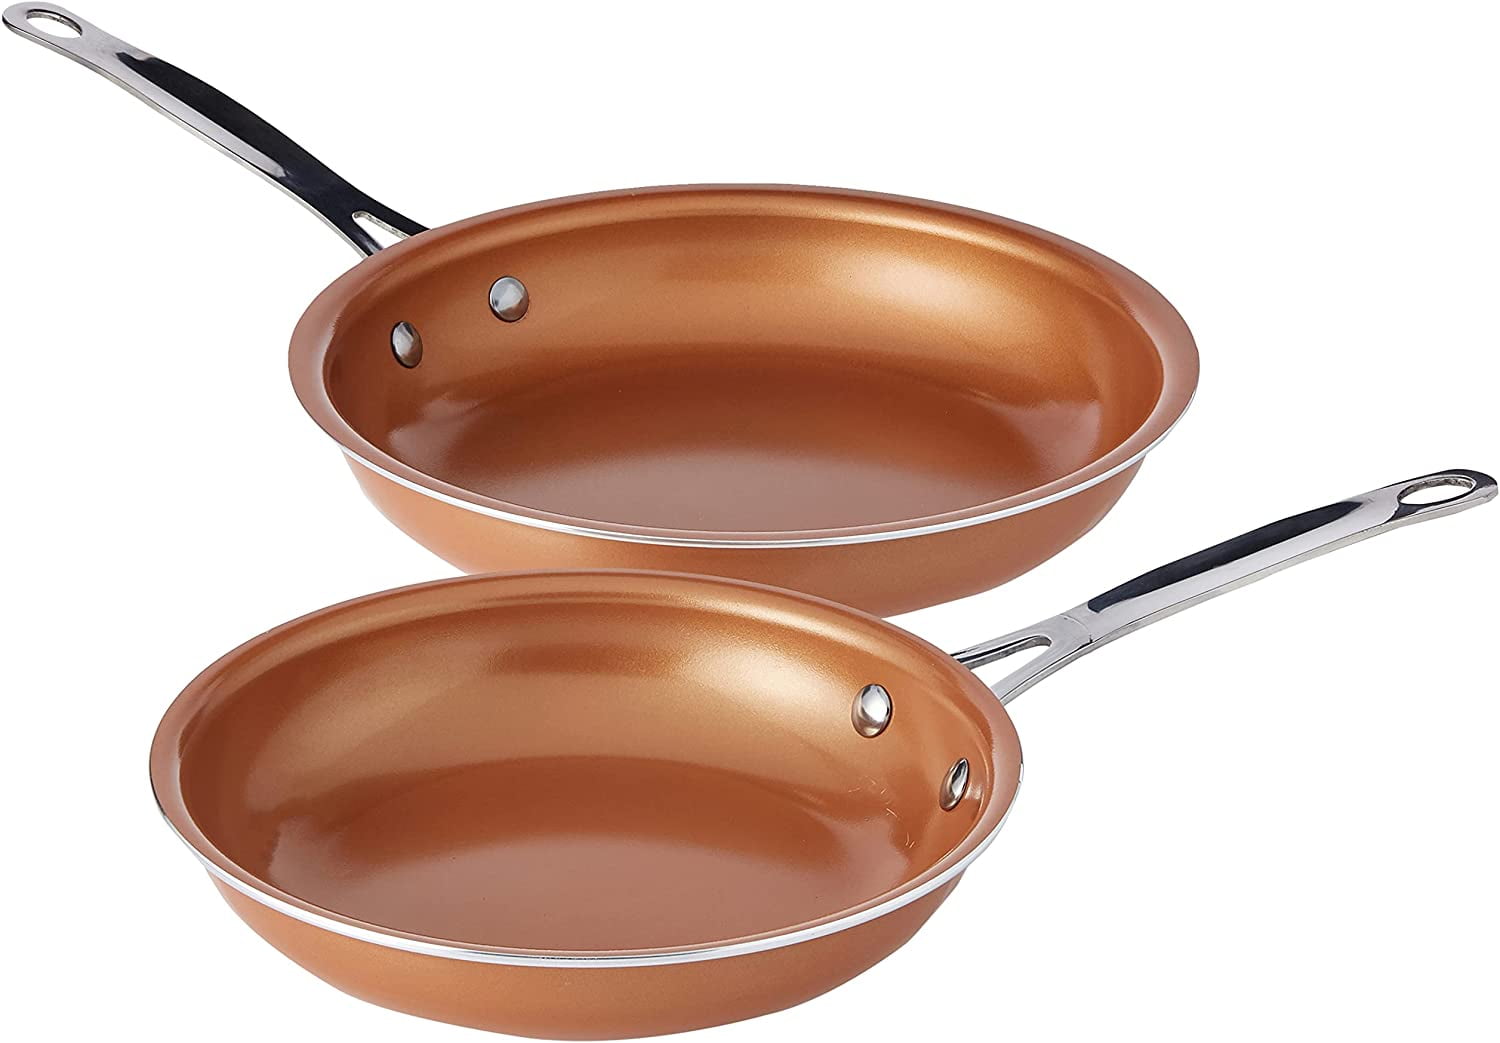 Gotham Steel Copper Pots and Pans Set, 10 Piece Nonstick Cookware set with Titanium Copper and Ceramic Coating, Dishwasher Safe and Oven Safe - 3